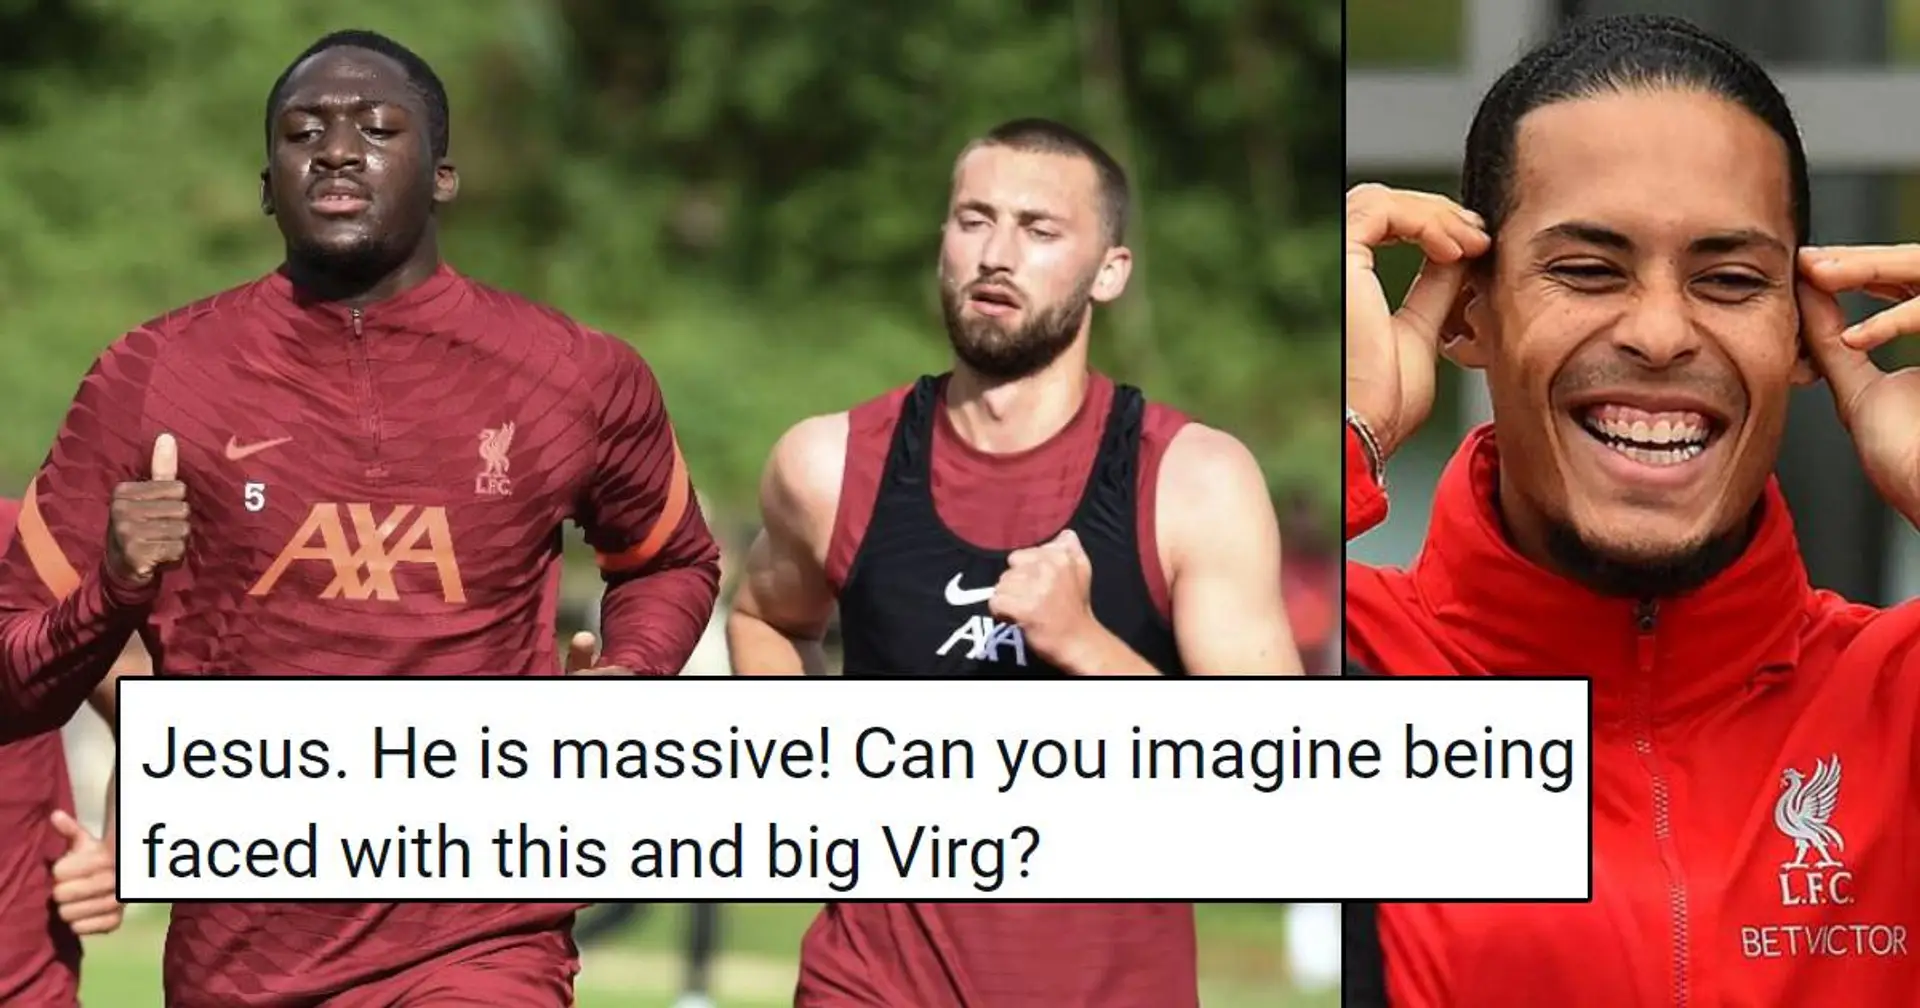 'He's a f*****g unit': Konate pictured running next to Nat - Liverpool fans can't believe centre-back's size